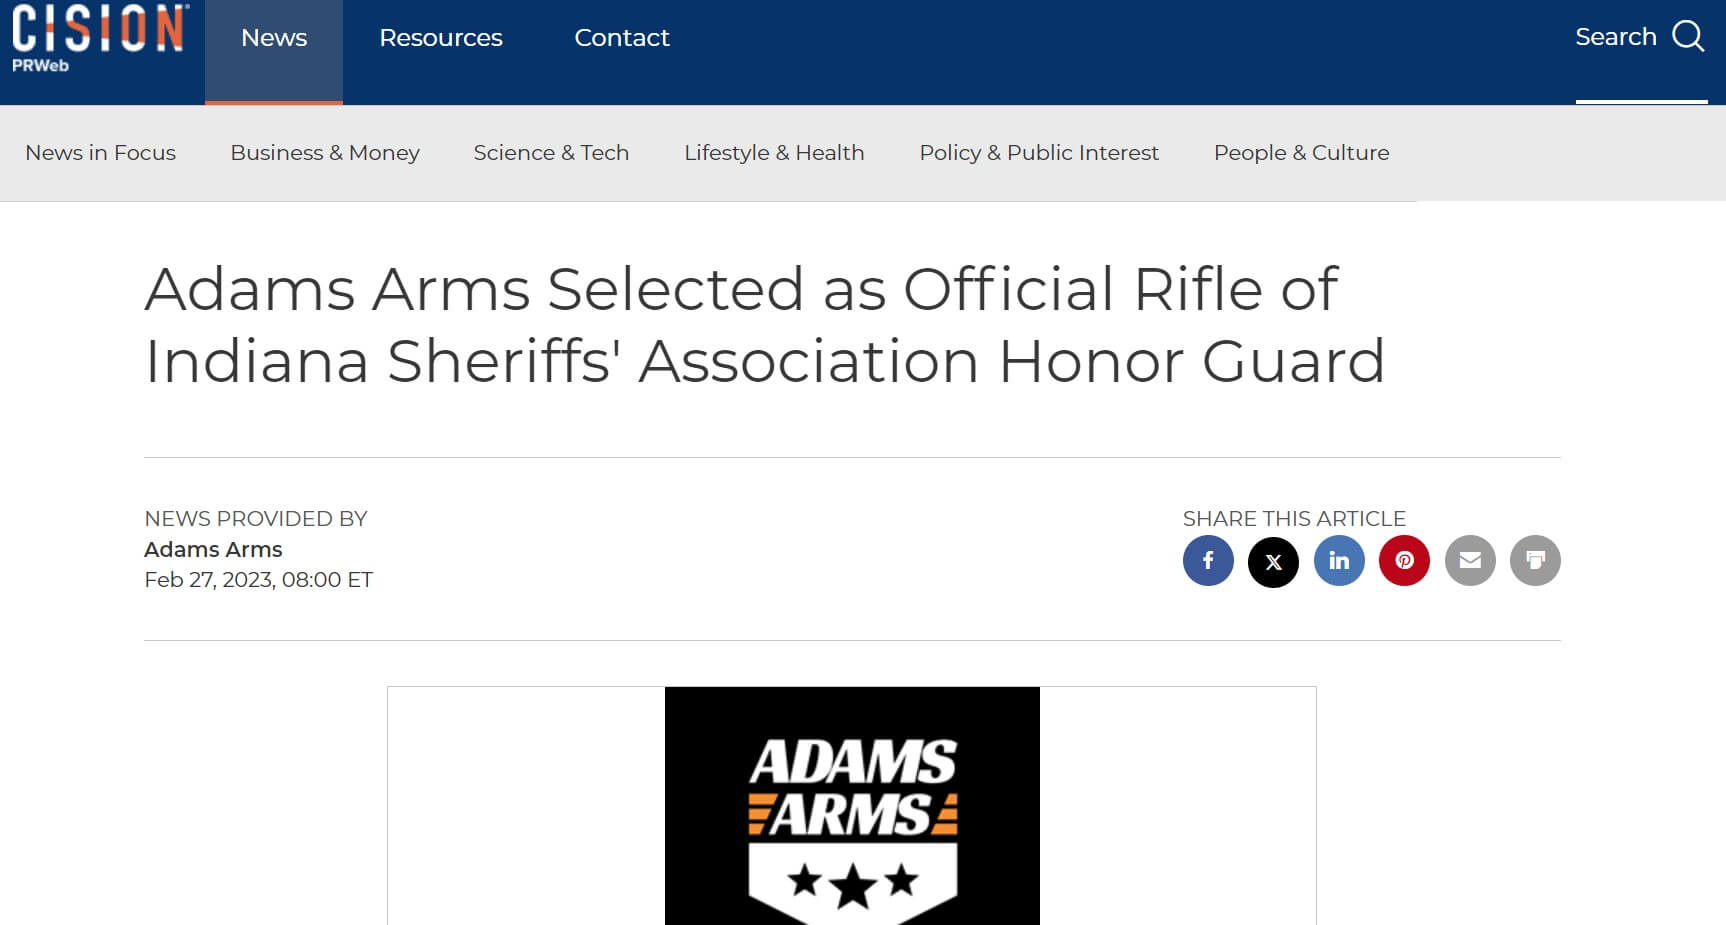 Adams Arms Selected as Official Rifle of Indiana Sheriffs Association Honor Guard